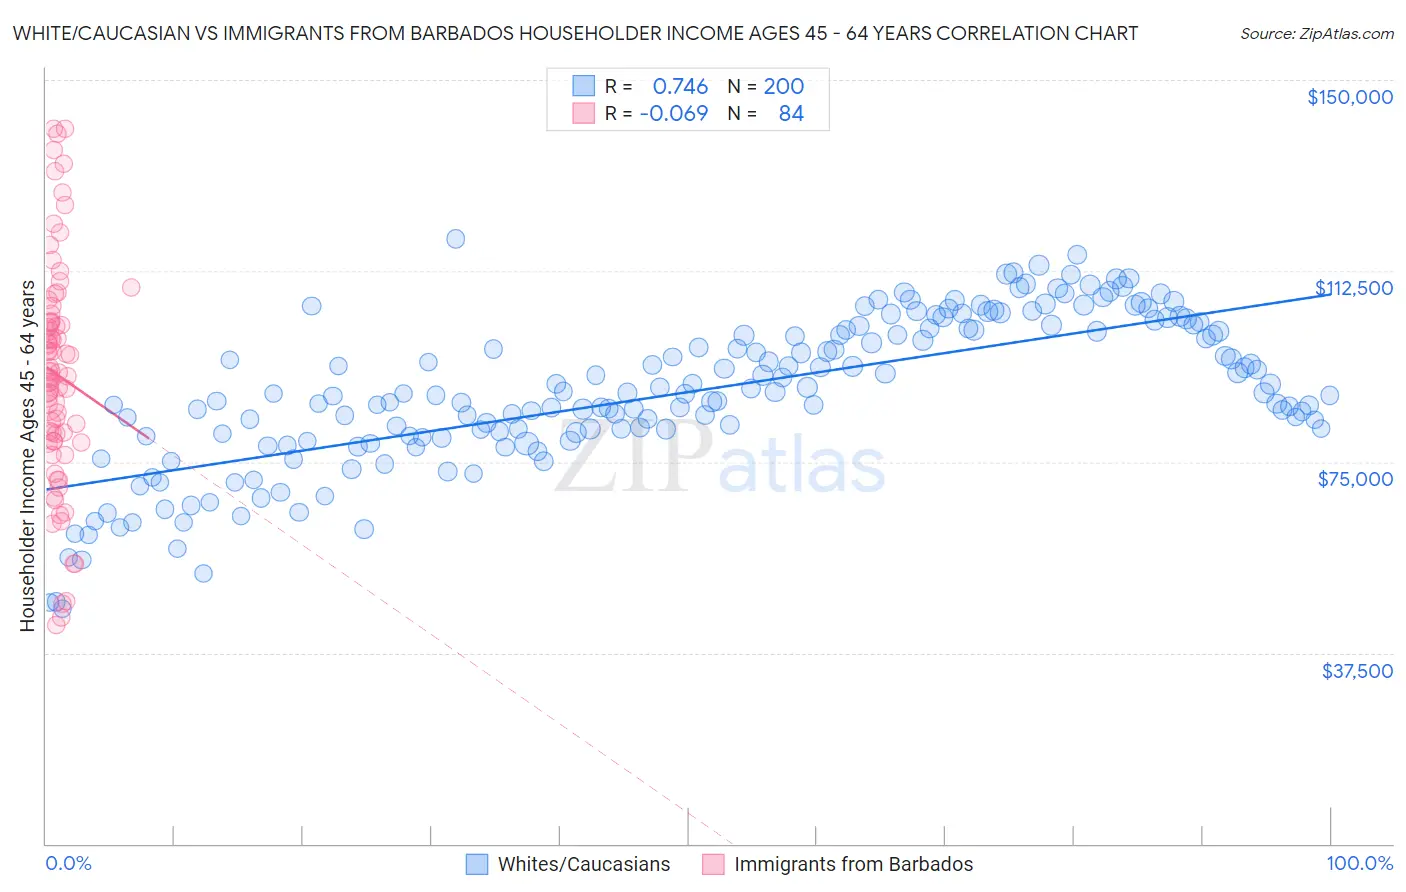 White/Caucasian vs Immigrants from Barbados Householder Income Ages 45 - 64 years